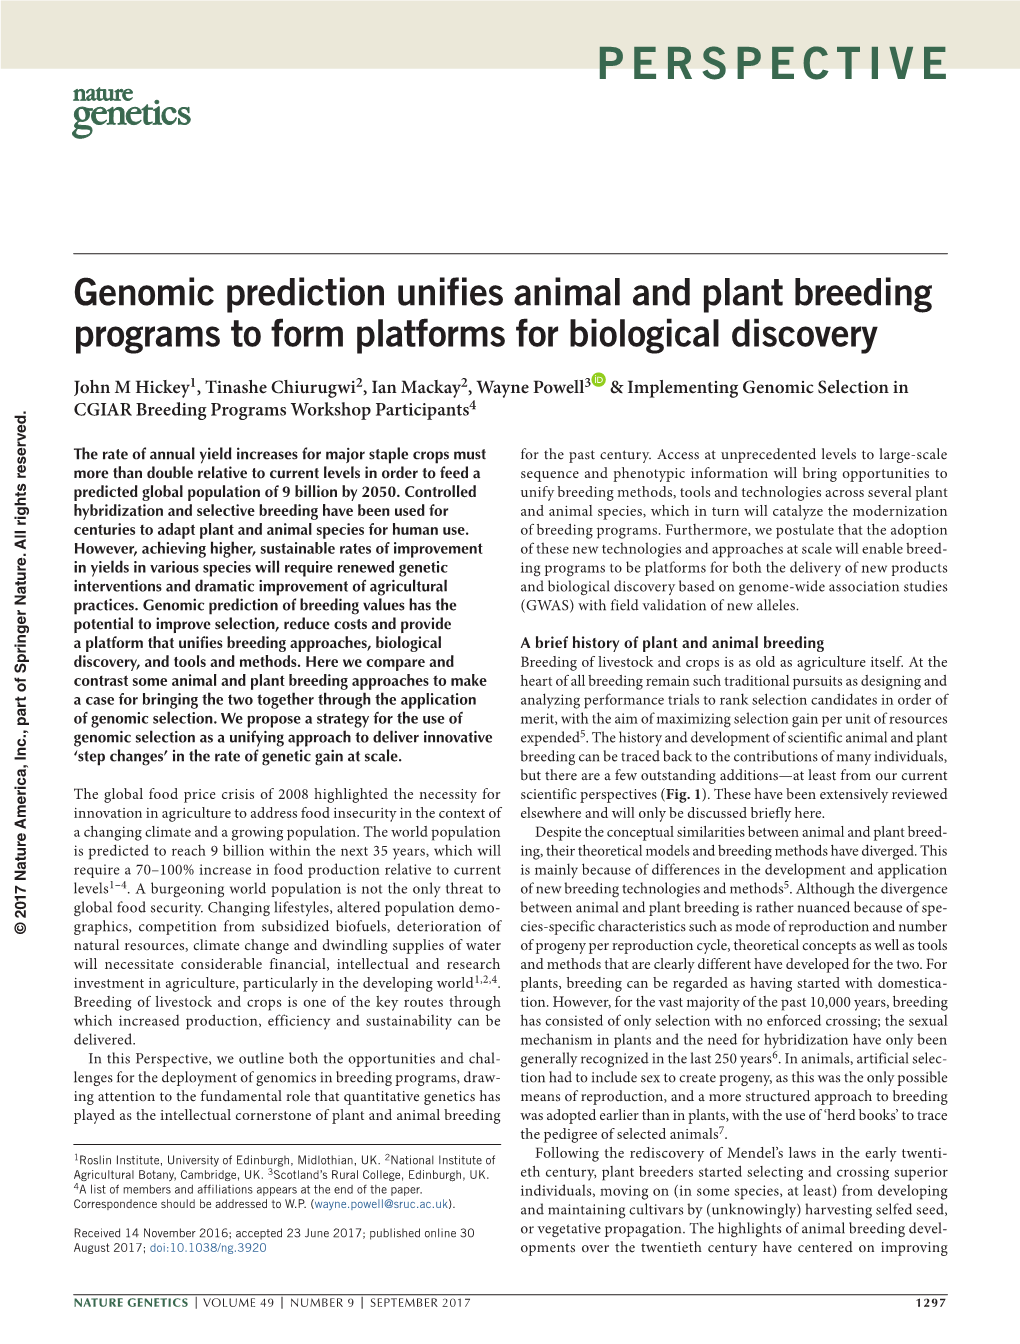 Genomic Prediction Unifies Animal and Plant Breeding Programs to Form Platforms for Biological Discovery